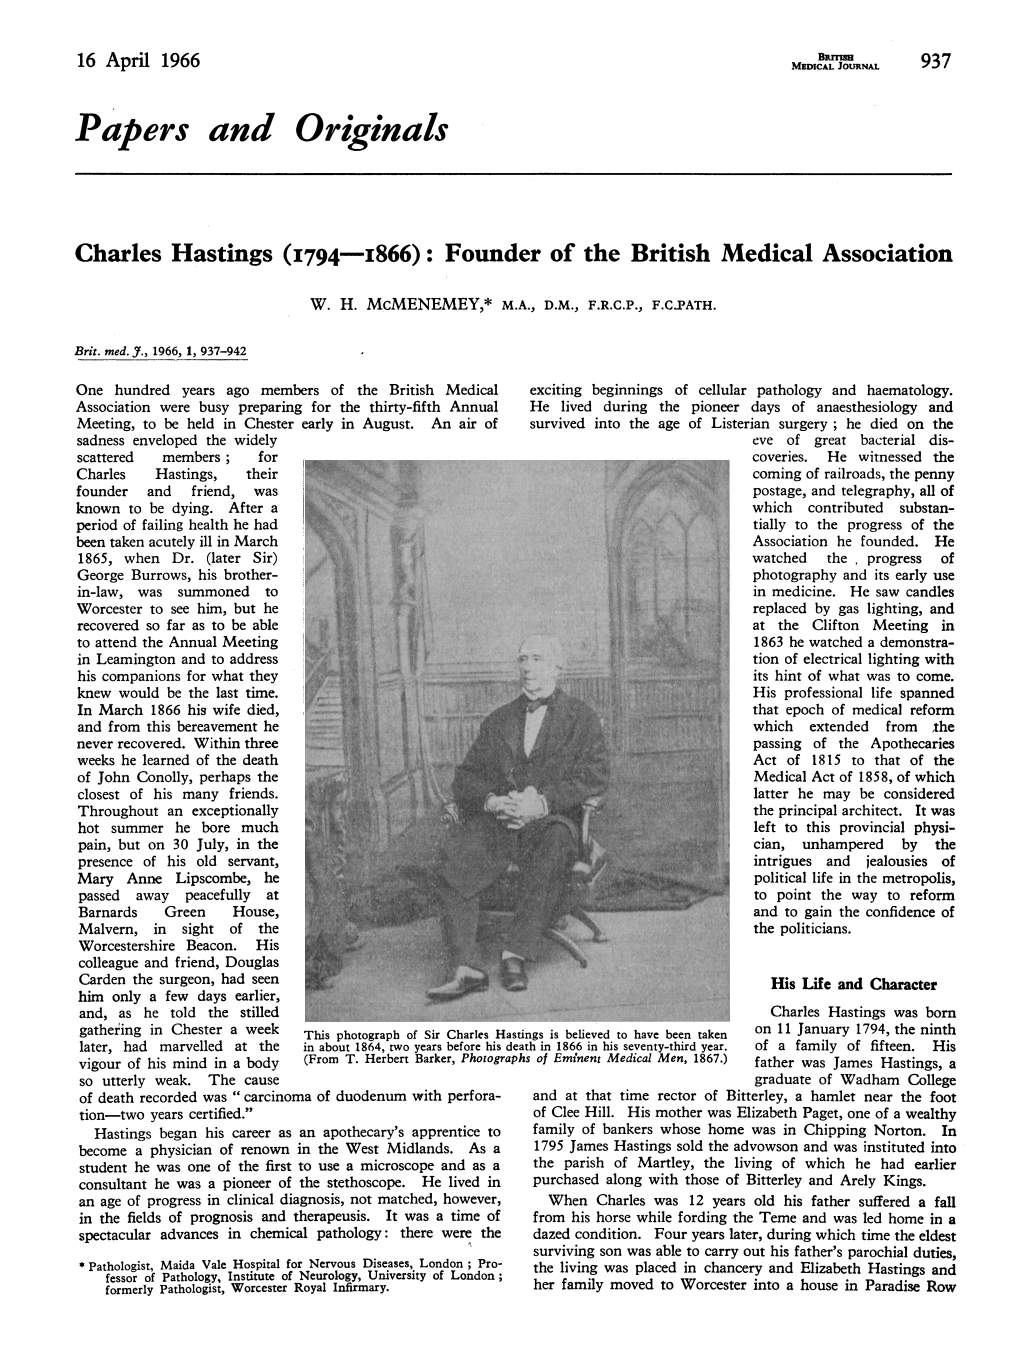 Charles Hastings (1794-I866): Founder of the British Medical Association